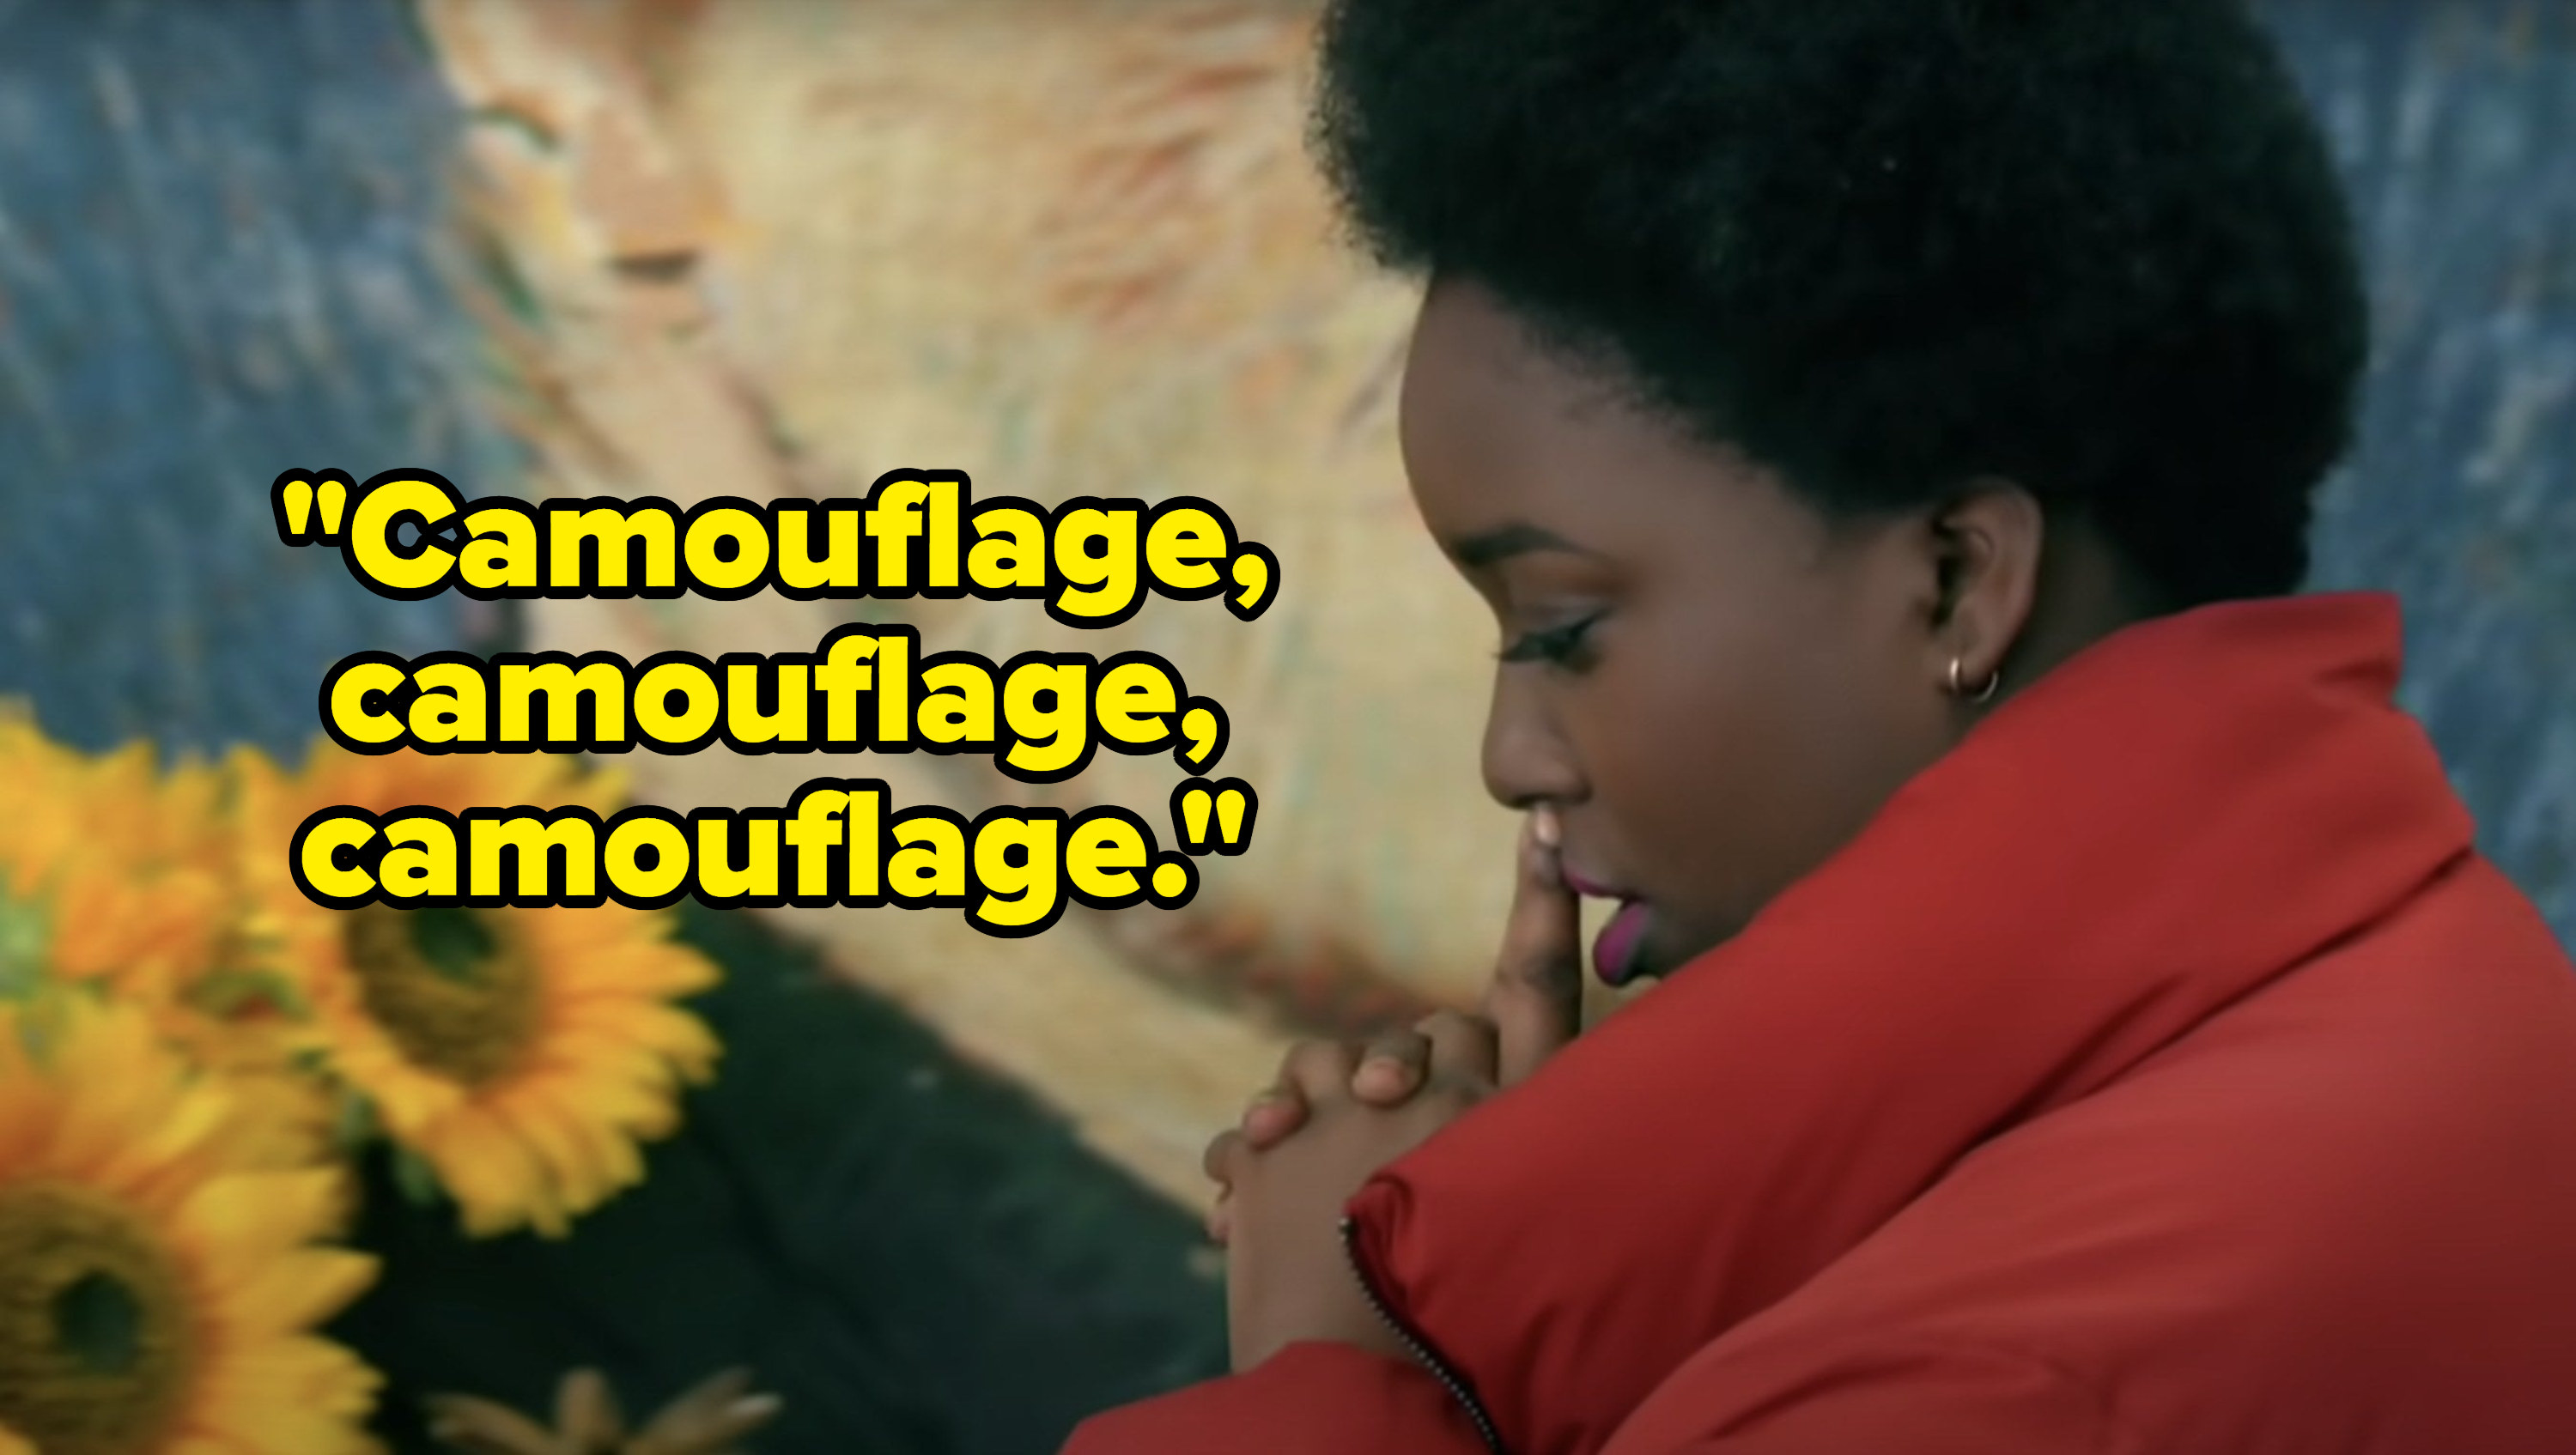 Lolly Adefope, says, Camouflage, camouflage, camouflage